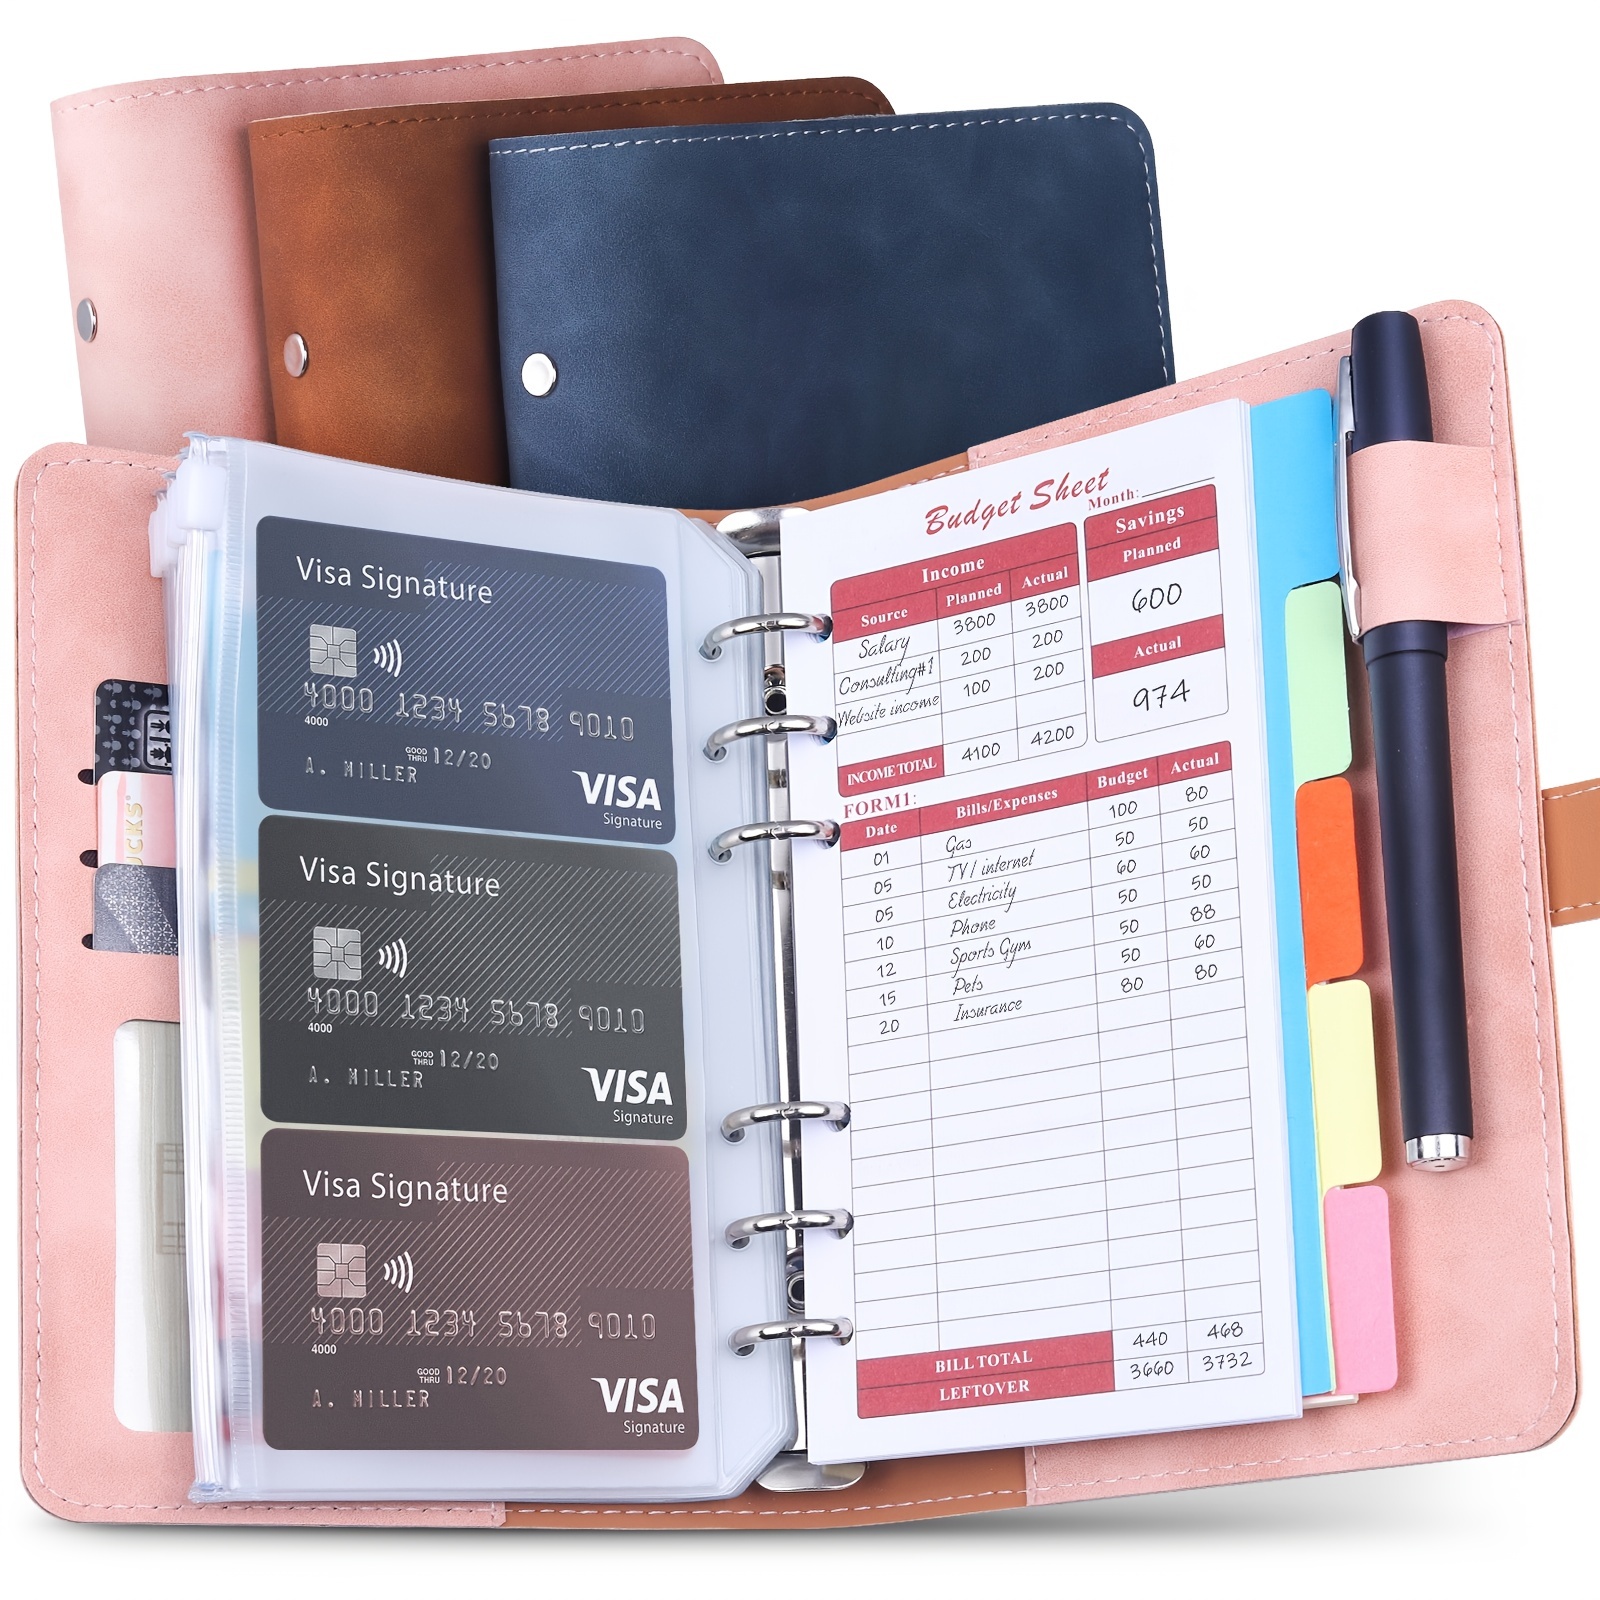 Budget Binder with Zipper Envelopes, Cash Envelopes for Budgeting with Planner A6 Binder & Calculator, Money Organizer for Cash and Card & Sticker